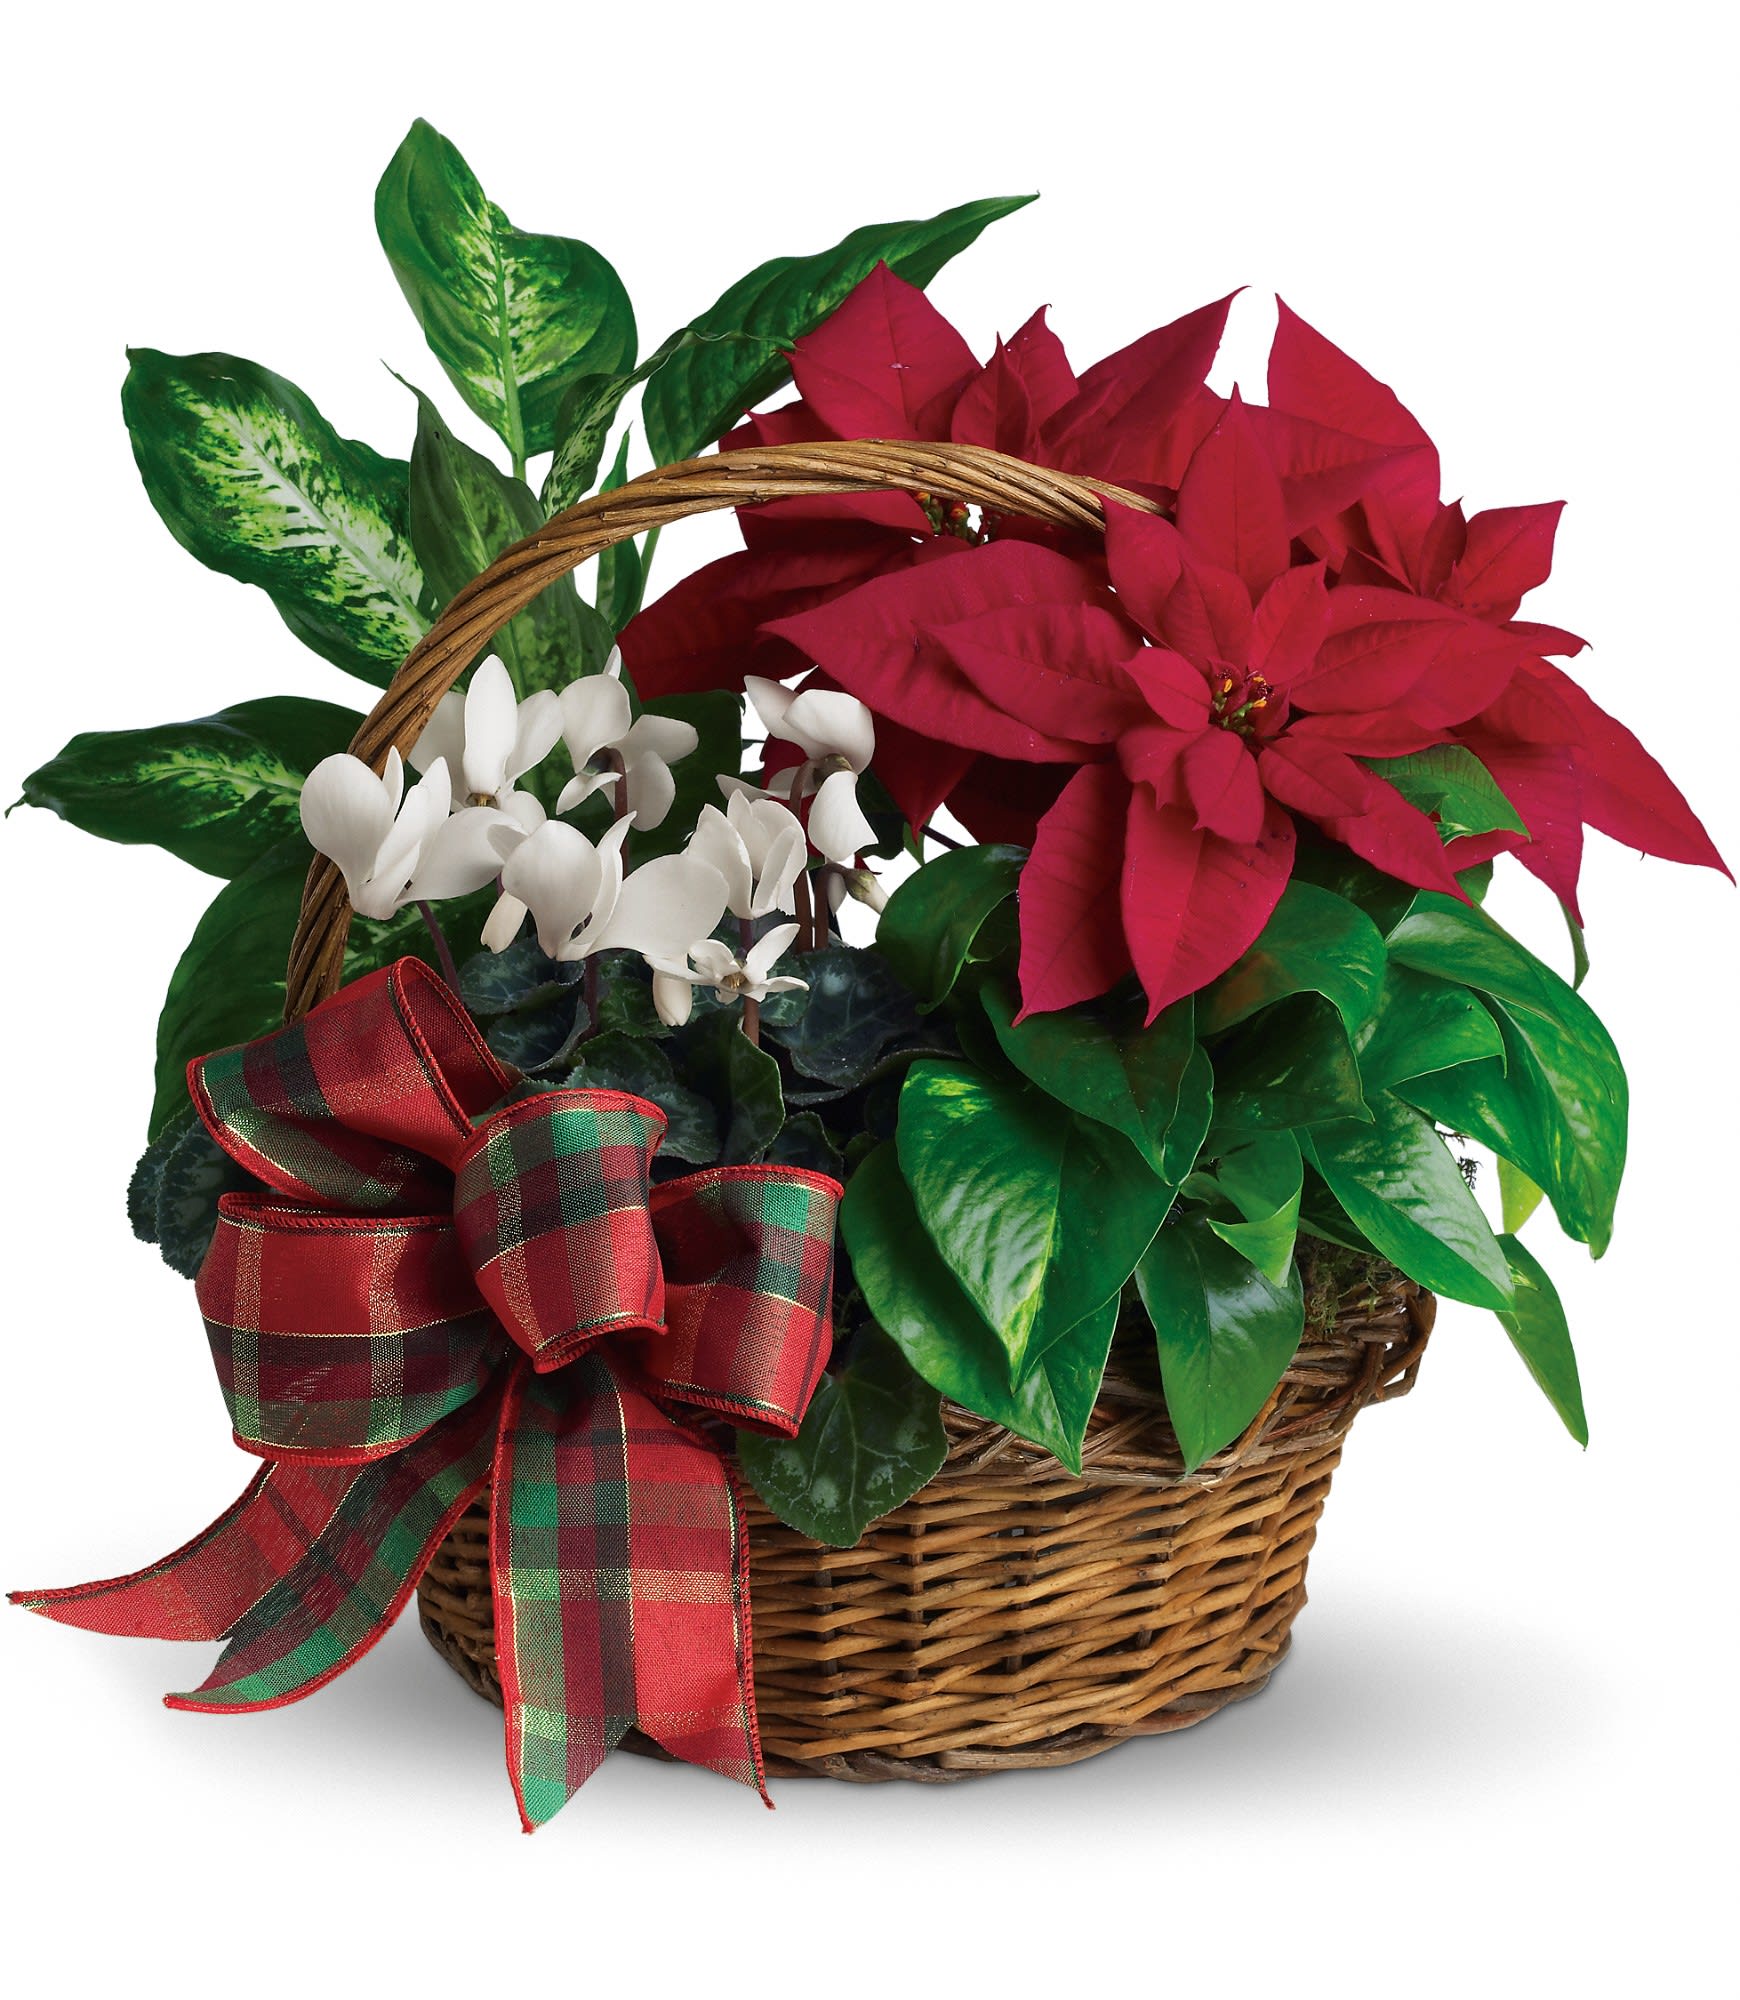 Holiday Homecoming Basket - Real live plants make this basket a welcome gift for any home! It's perfectly suited for the season and will be appreciated even after the holidays.  A brilliant red poinsettia and dazzling white cyclamen are nestled together with bright green pothos and dieffenbachia. Add a festive plaid taffeta ribbon and this basket delivers a lively holiday message.  Approximately 17 1/2&quot; W x 17&quot; H  Orientation: All-Around  As Shown : T123-2A